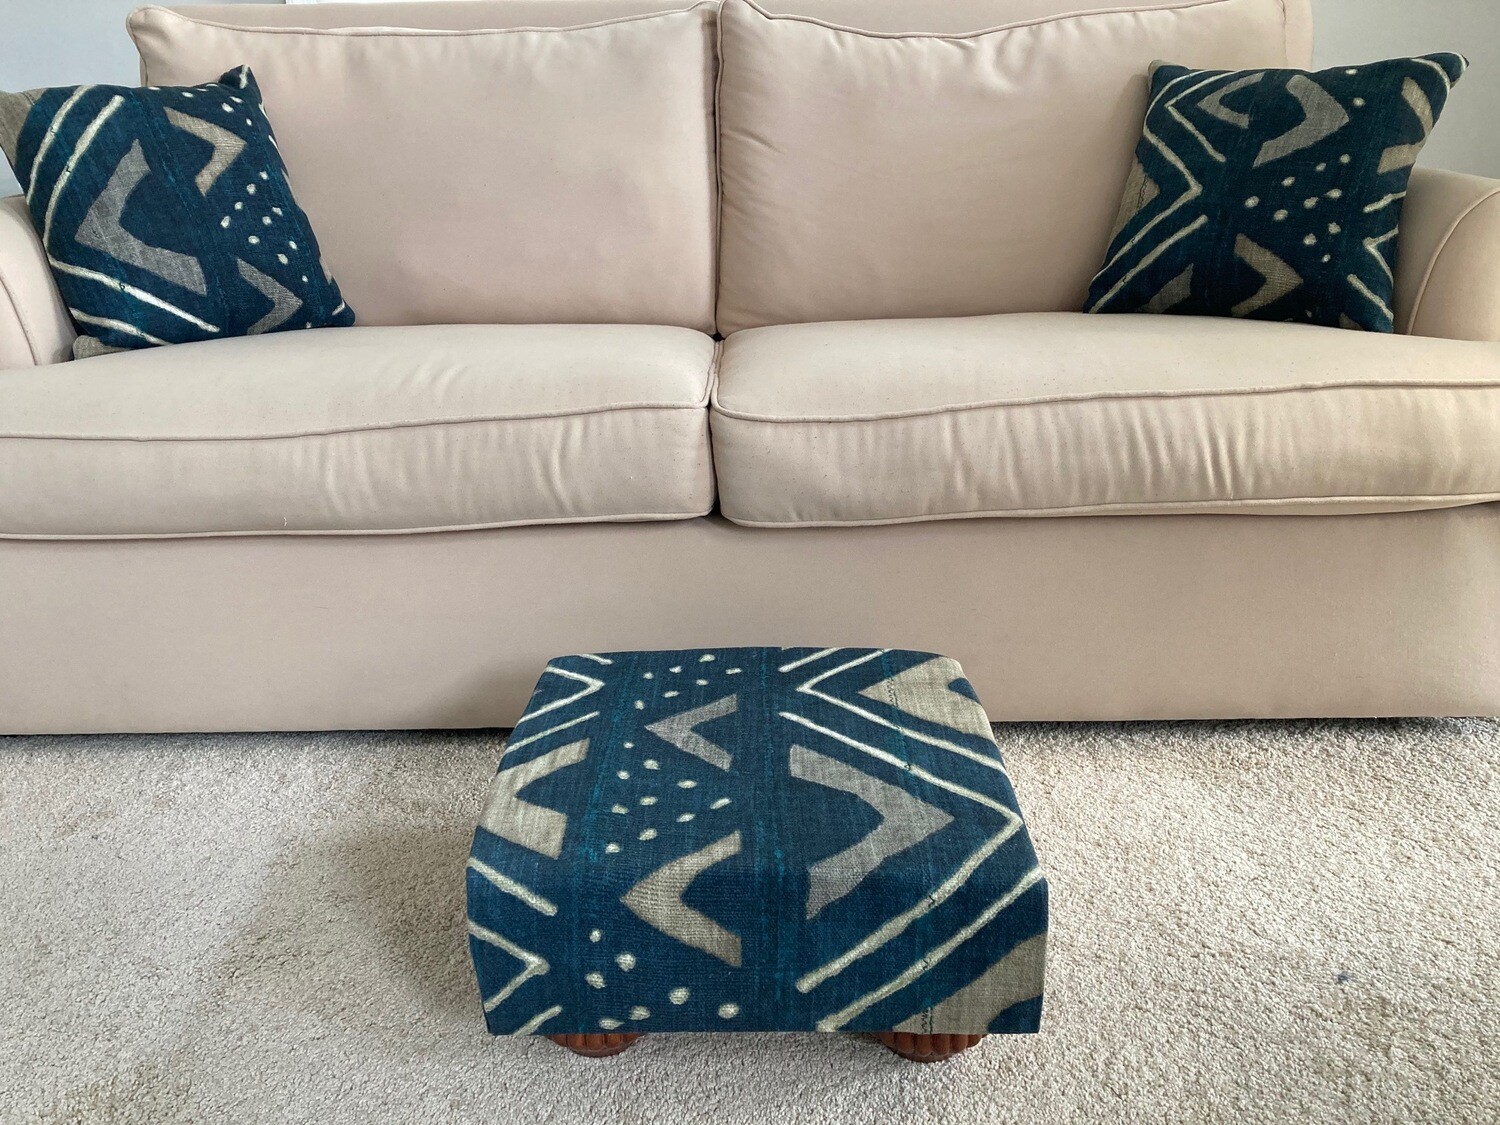 Blue African Mud Cloth Footstool with matching pillows